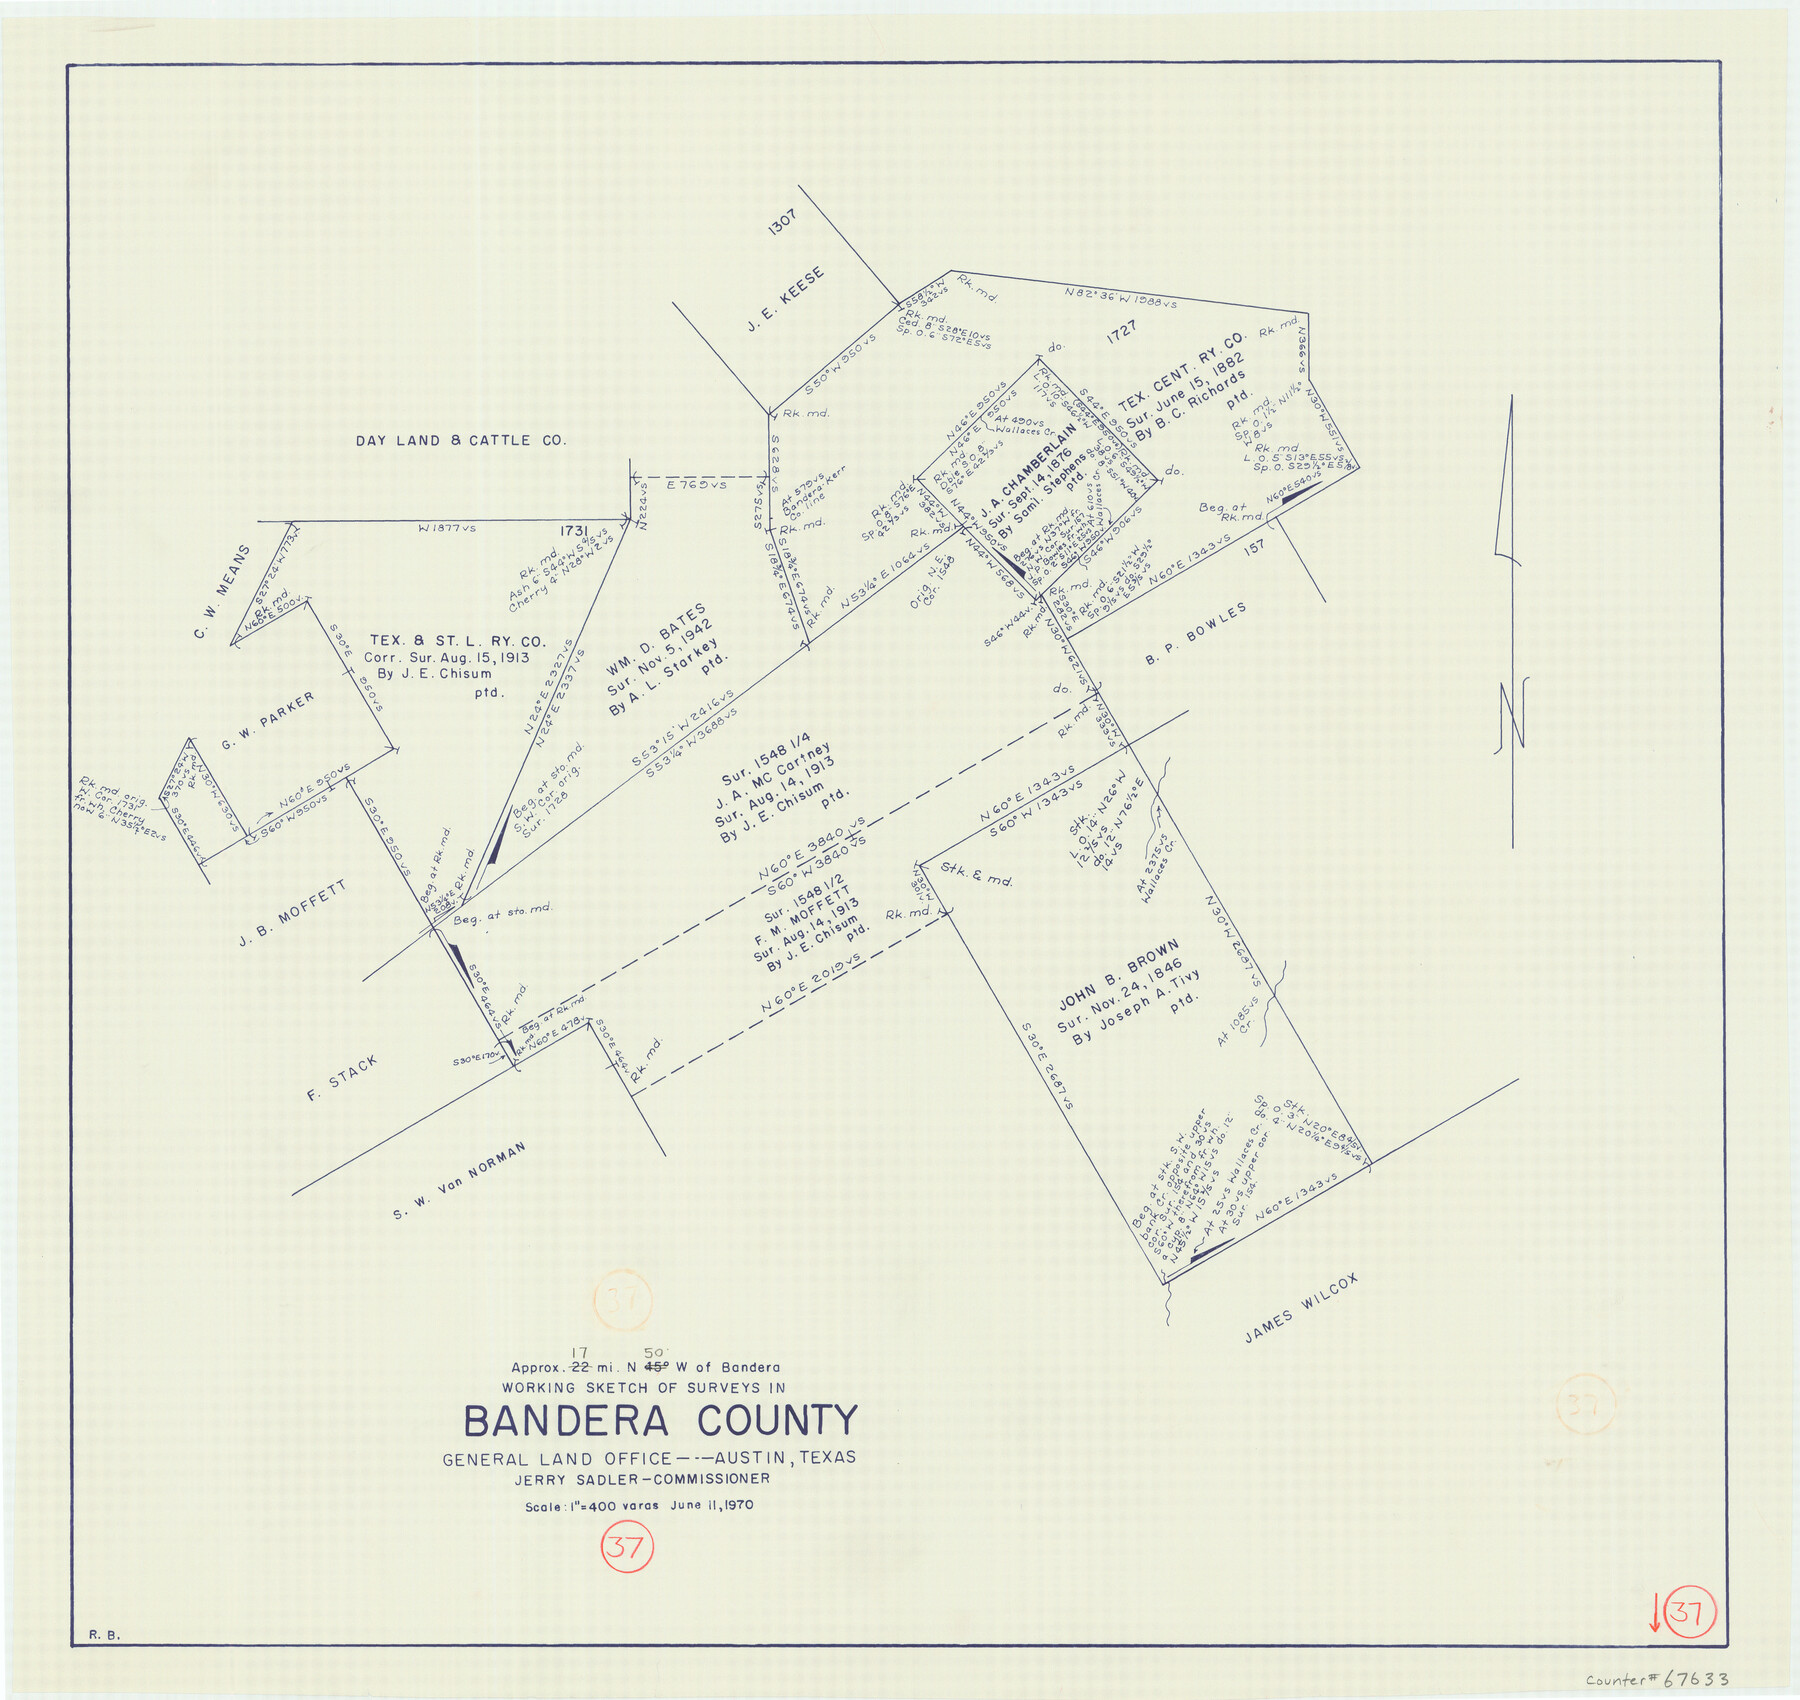 67633, Bandera County Working Sketch 37, General Map Collection